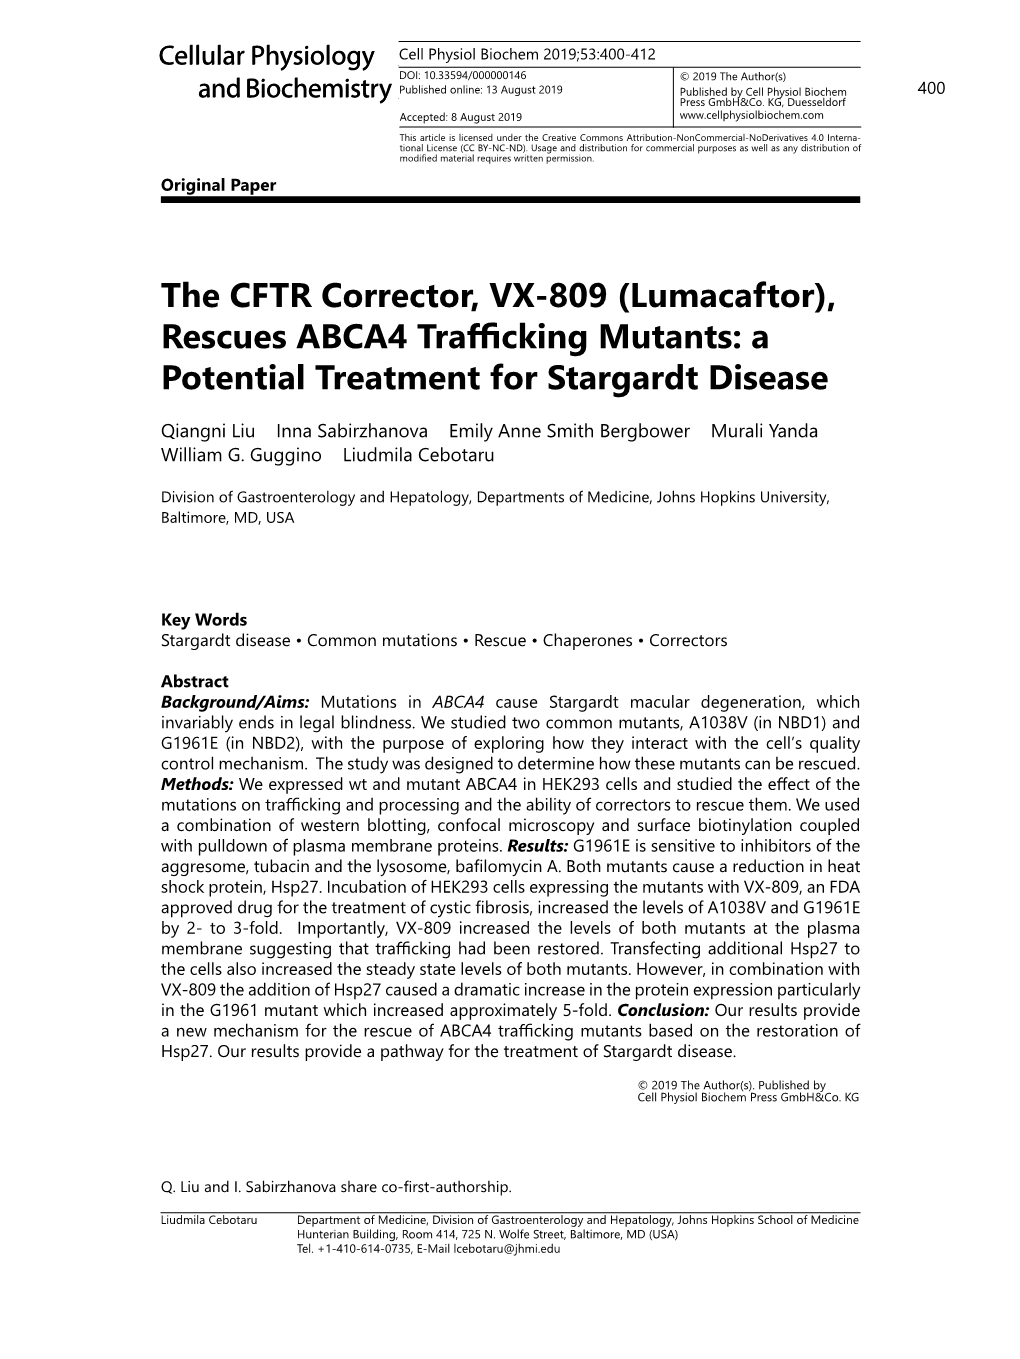 The CFTR Corrector, VX-809 (Lumacaftor), Rescues ABCA4 Trafficking Mutants: a Potential Treatment for Stargardt Disease